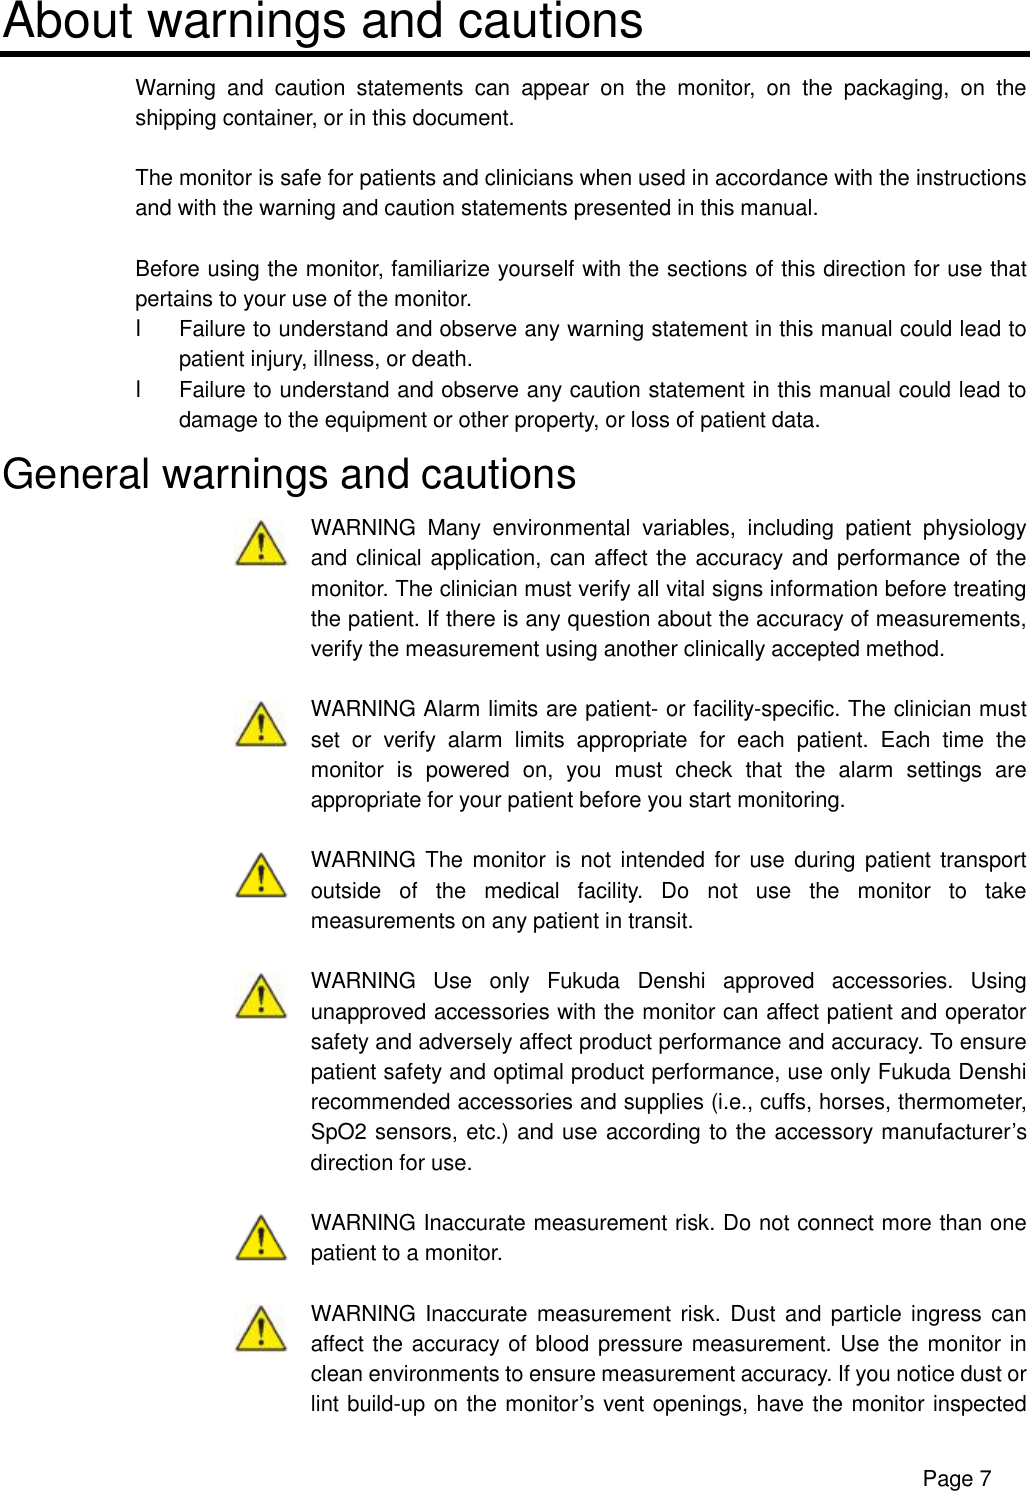      Page 7 About warnings and cautions Warning and caution statements can appear on the monitor, on the packaging, on the shipping container, or in this document.  The monitor is safe for patients and clinicians when used in accordance with the instructions and with the warning and caution statements presented in this manual.  Before using the monitor, familiarize yourself with the sections of this direction for use that pertains to your use of the monitor. l Failure to understand and observe any warning statement in this manual could lead to patient injury, illness, or death. l Failure to understand and observe any caution statement in this manual could lead to damage to the equipment or other property, or loss of patient data. General warnings and cautions  WARNING Many environmental variables, including patient physiology and clinical application, can affect the accuracy and performance of the monitor. The clinician must verify all vital signs information before treating the patient. If there is any question about the accuracy of measurements, verify the measurement using another clinically accepted method.   WARNING Alarm limits are patient- or facility-specific. The clinician must set or verify alarm limits appropriate for each patient. Each time the monitor is powered on, you must check that the alarm settings are appropriate for your patient before you start monitoring.   WARNING The monitor is not intended for use during patient transport outside of the medical facility. Do not use the monitor to take measurements on any patient in transit.   WARNING Use only Fukuda Denshi approved accessories. Using unapproved accessories with the monitor can affect patient and operator safety and adversely affect product performance and accuracy. To ensure patient safety and optimal product performance, use only Fukuda Denshi recommended accessories and supplies (i.e., cuffs, horses, thermometer, SpO2 sensors, etc.) and use according to the accessory manufacturer’s direction for use.   WARNING Inaccurate measurement risk. Do not connect more than one patient to a monitor.   WARNING Inaccurate measurement risk. Dust and particle ingress can affect the accuracy of blood pressure measurement. Use the monitor in clean environments to ensure measurement accuracy. If you notice dust or lint build-up on the monitor’s vent openings, have the monitor inspected 